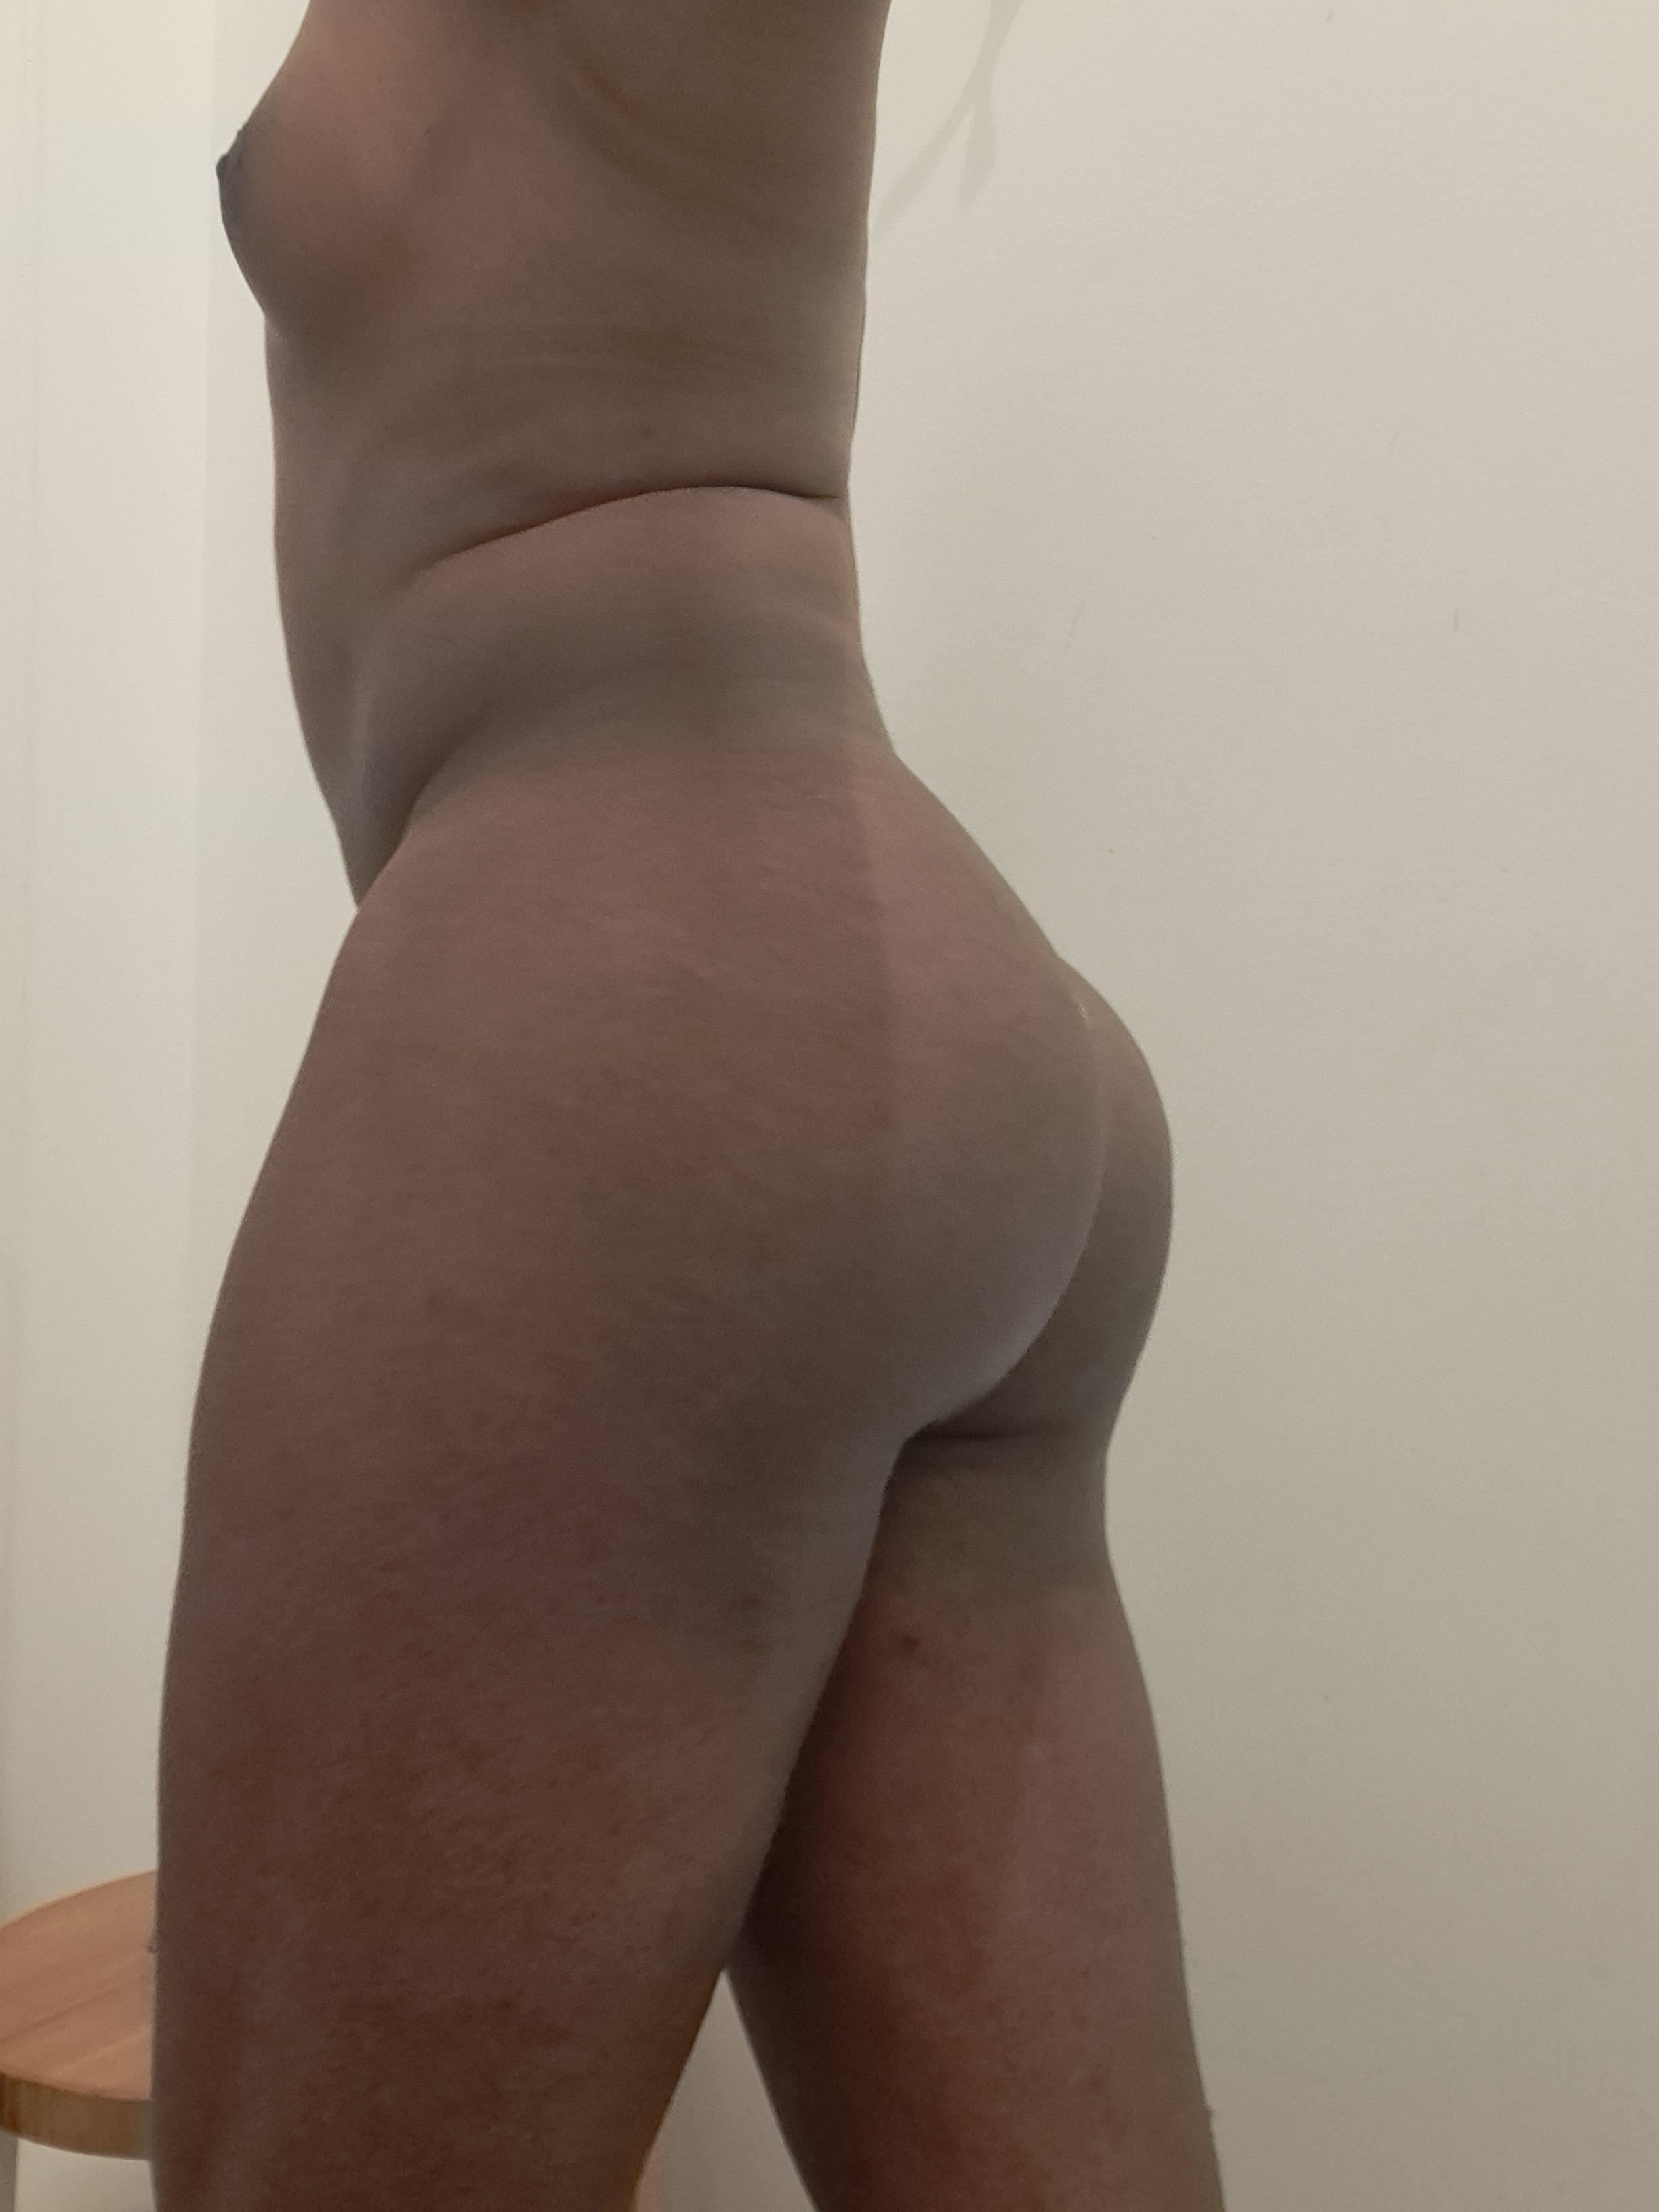 How do you like my ass? 🥰 13ijx4g - transexual woman